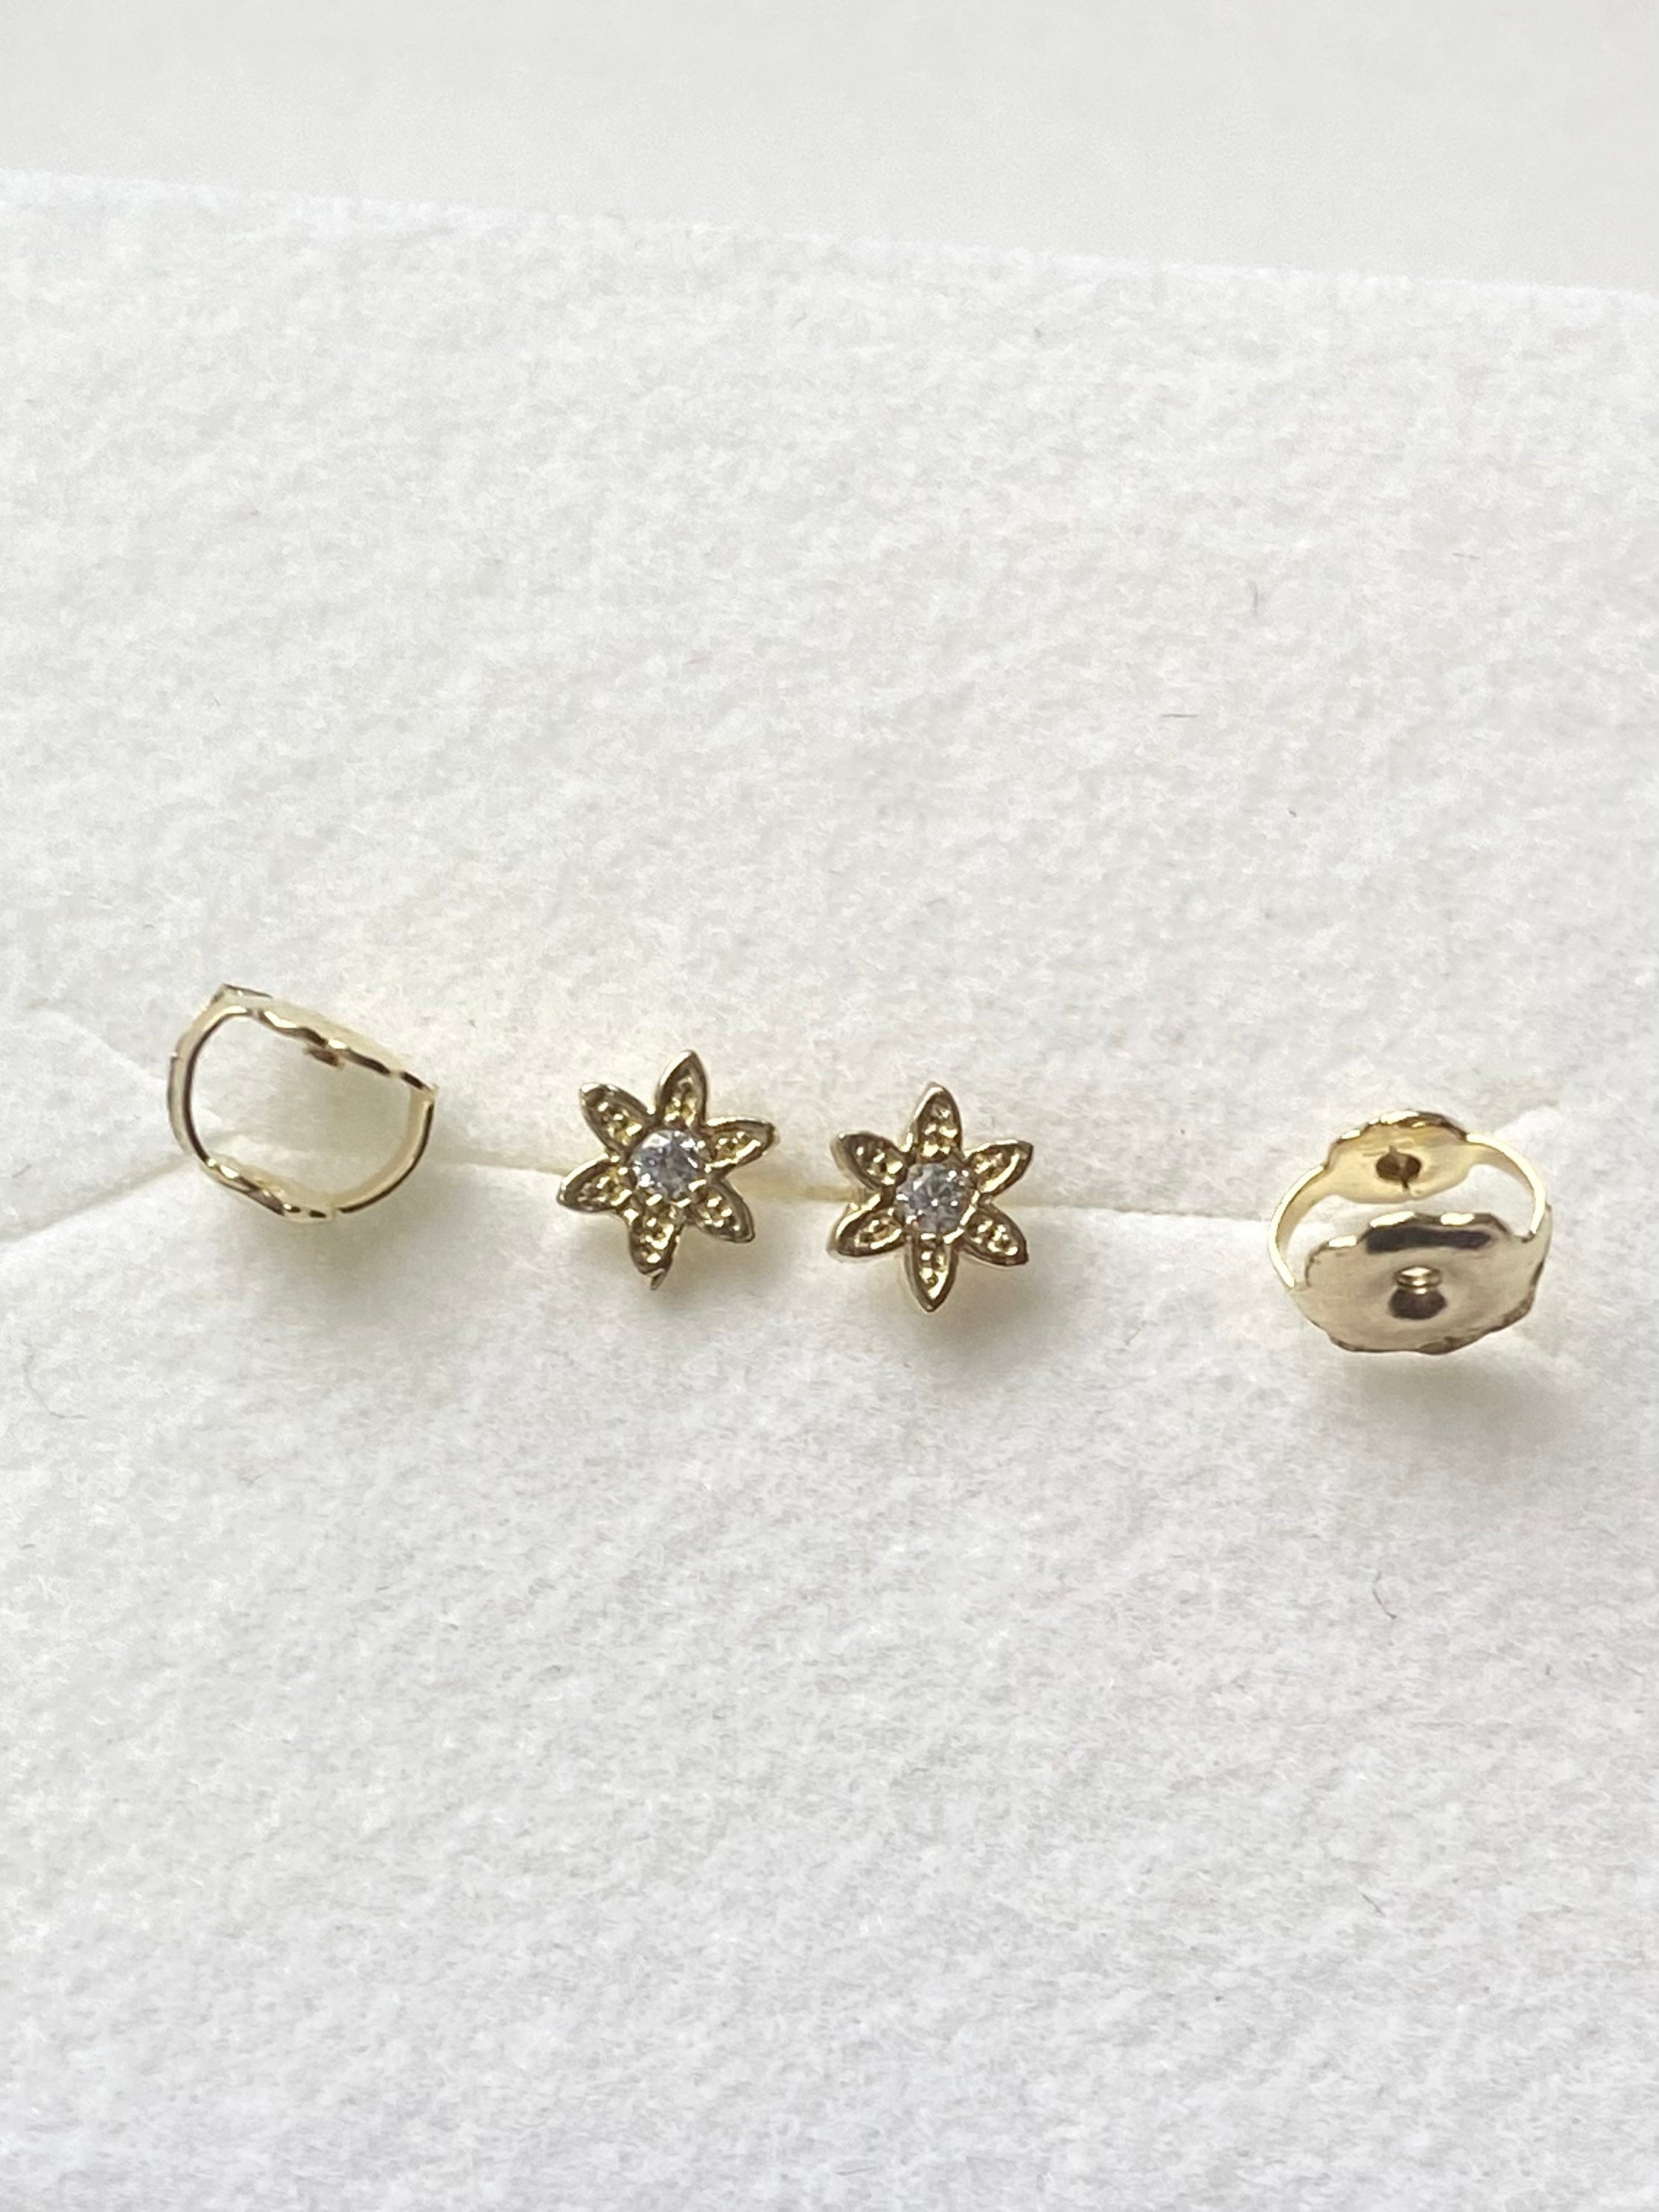 Are Baby Earrings Good for Everyday Wearing?